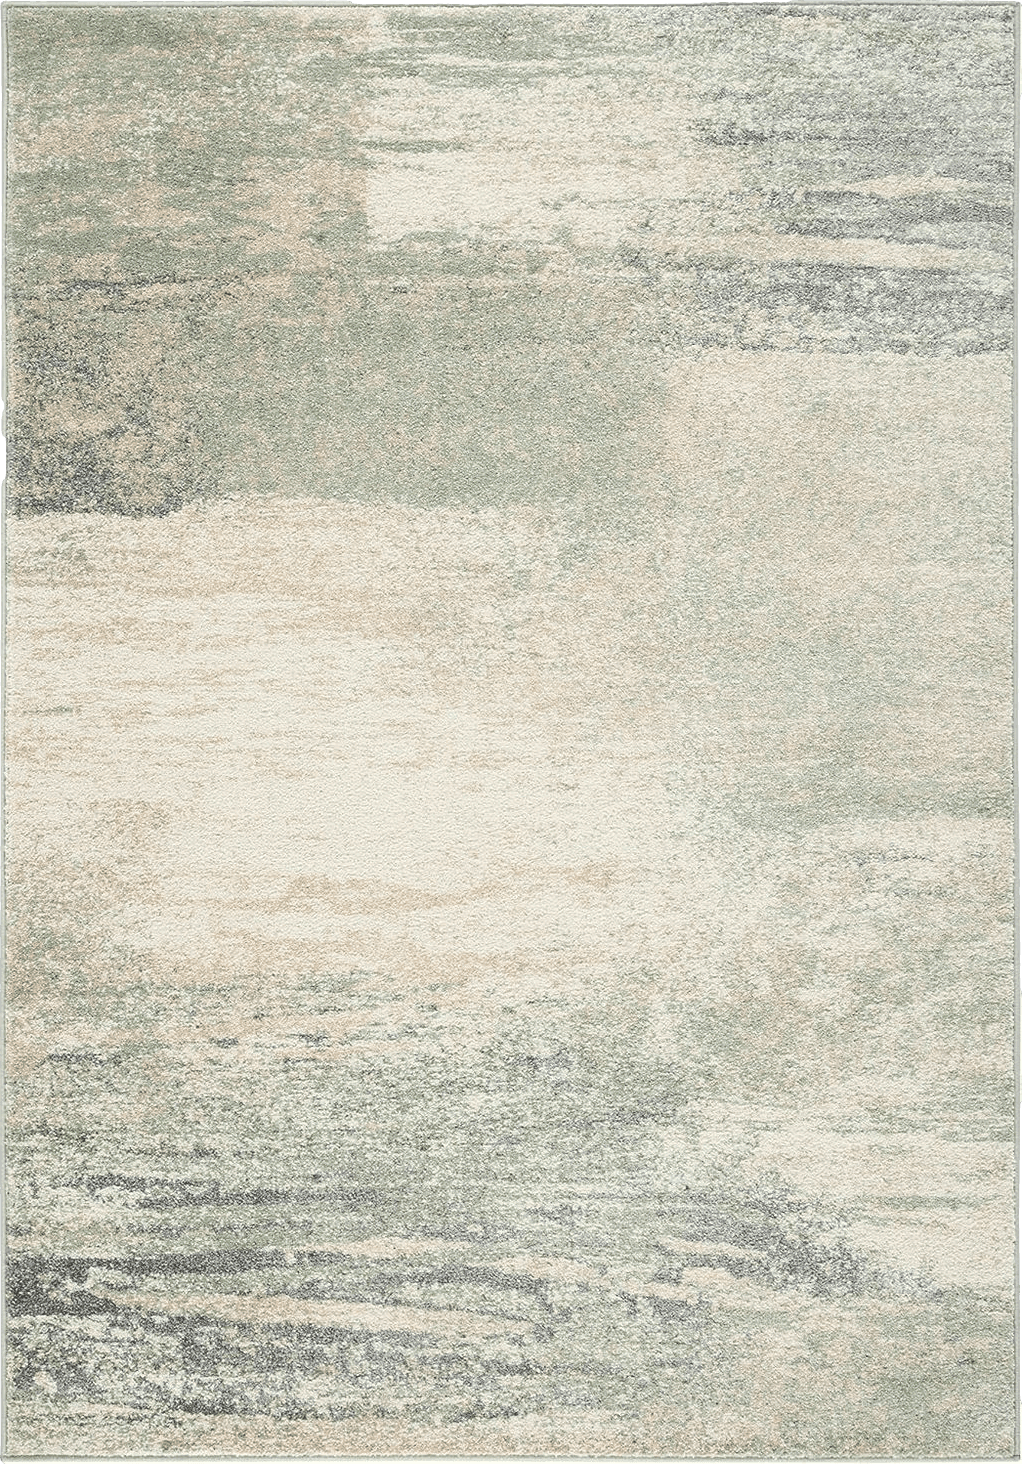 6x9 SAFAVIEH Adirondack Collection Area Rug - 6' x 9', Ivory & Sage, Modern Abstract Design, Non-Shedding & Easy Care, Ideal for High Traffic Areas in Living Room, Bedroom (ADR112W)